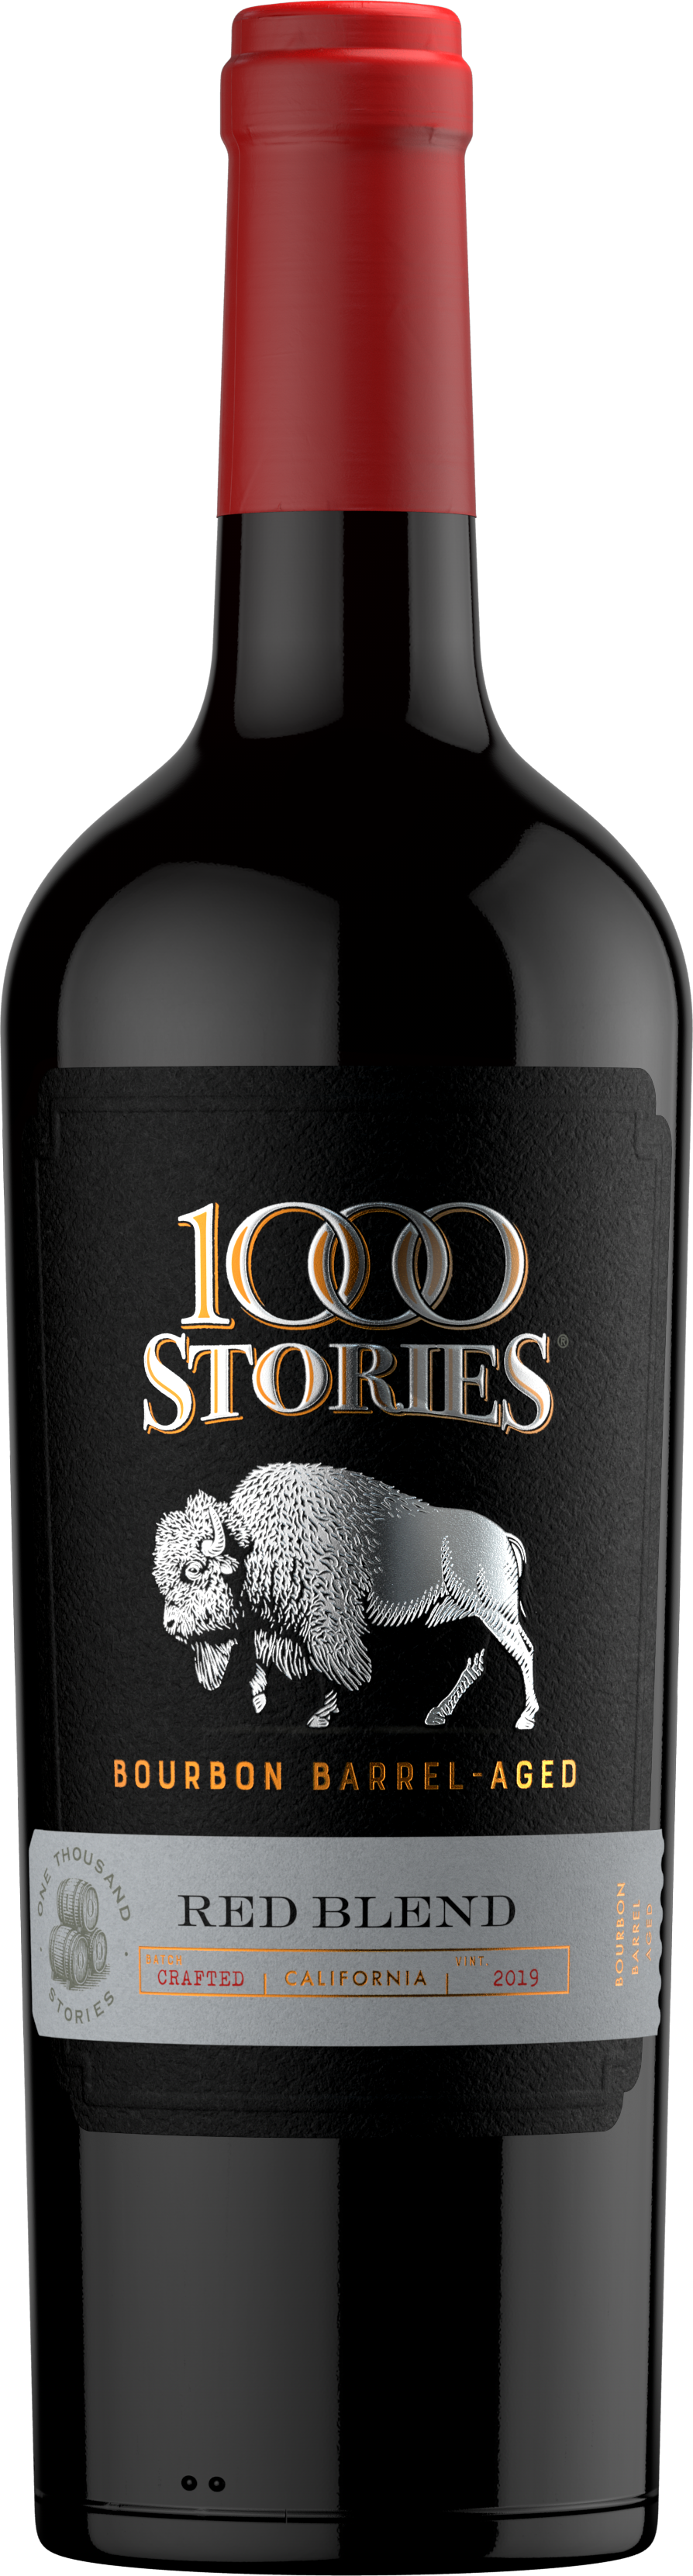 1000 Stories Red Blend 2019